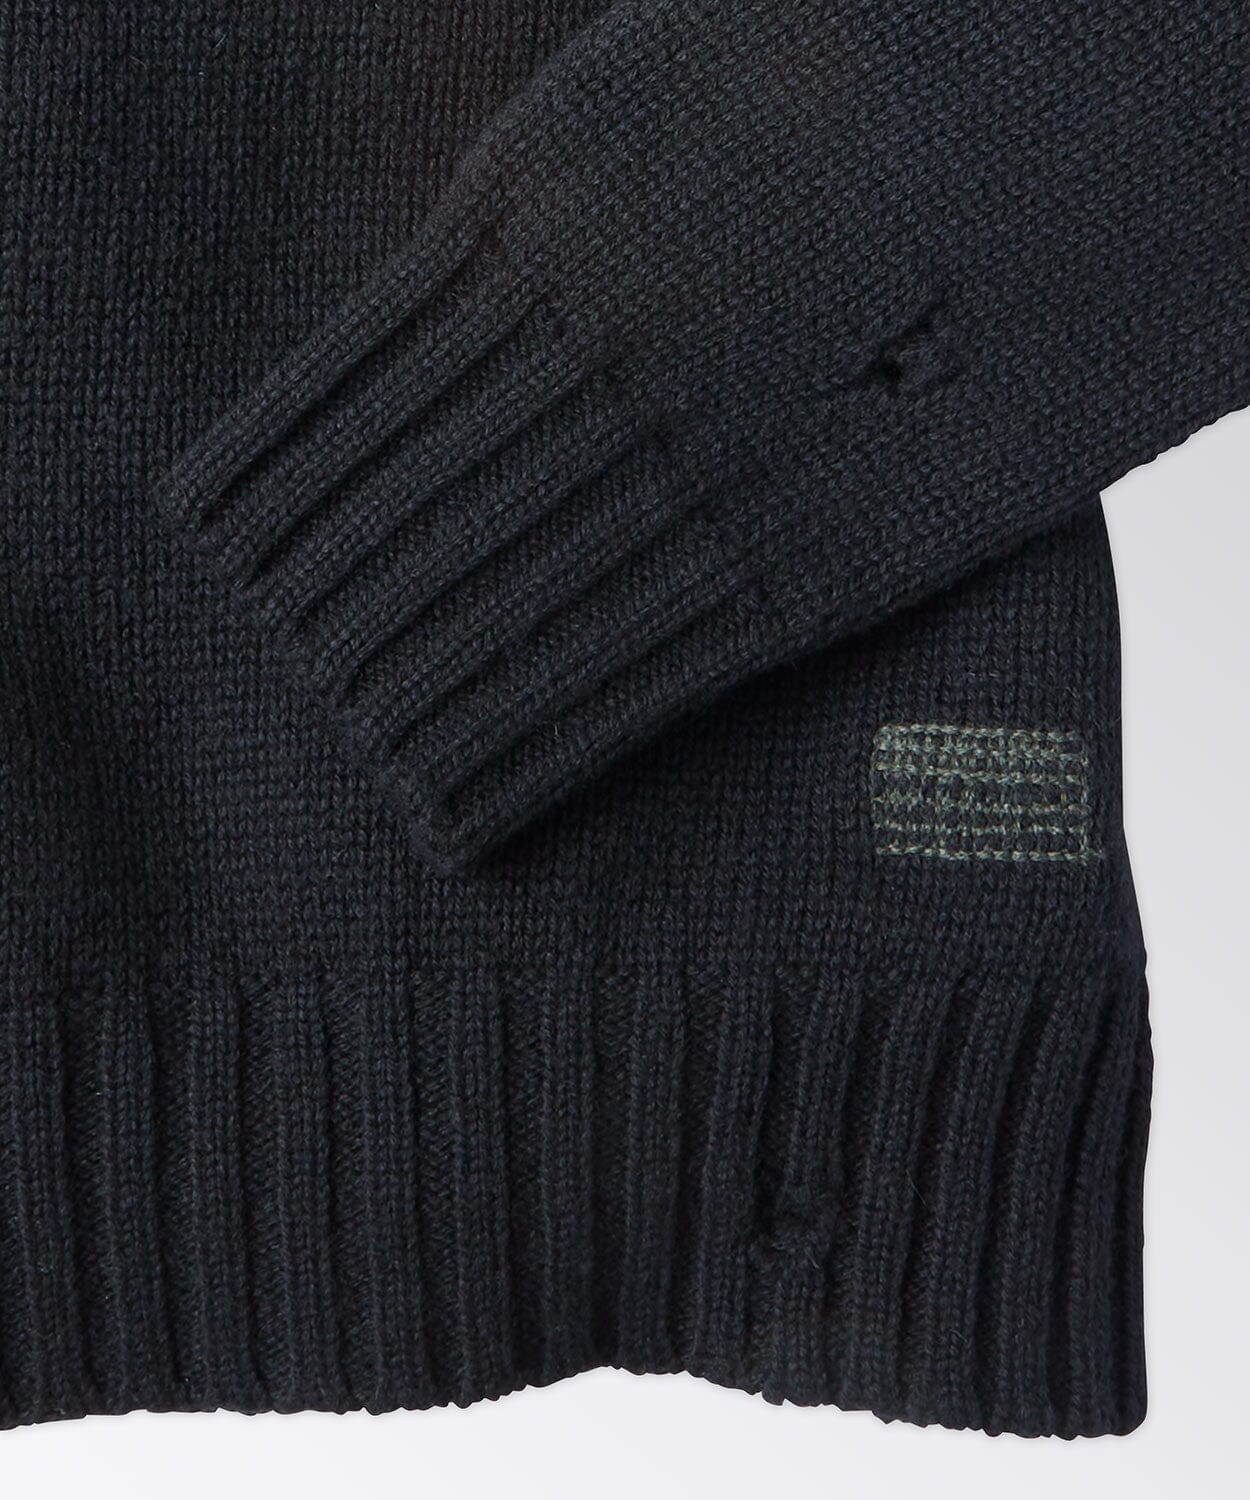 sleeve detail of a black sweater